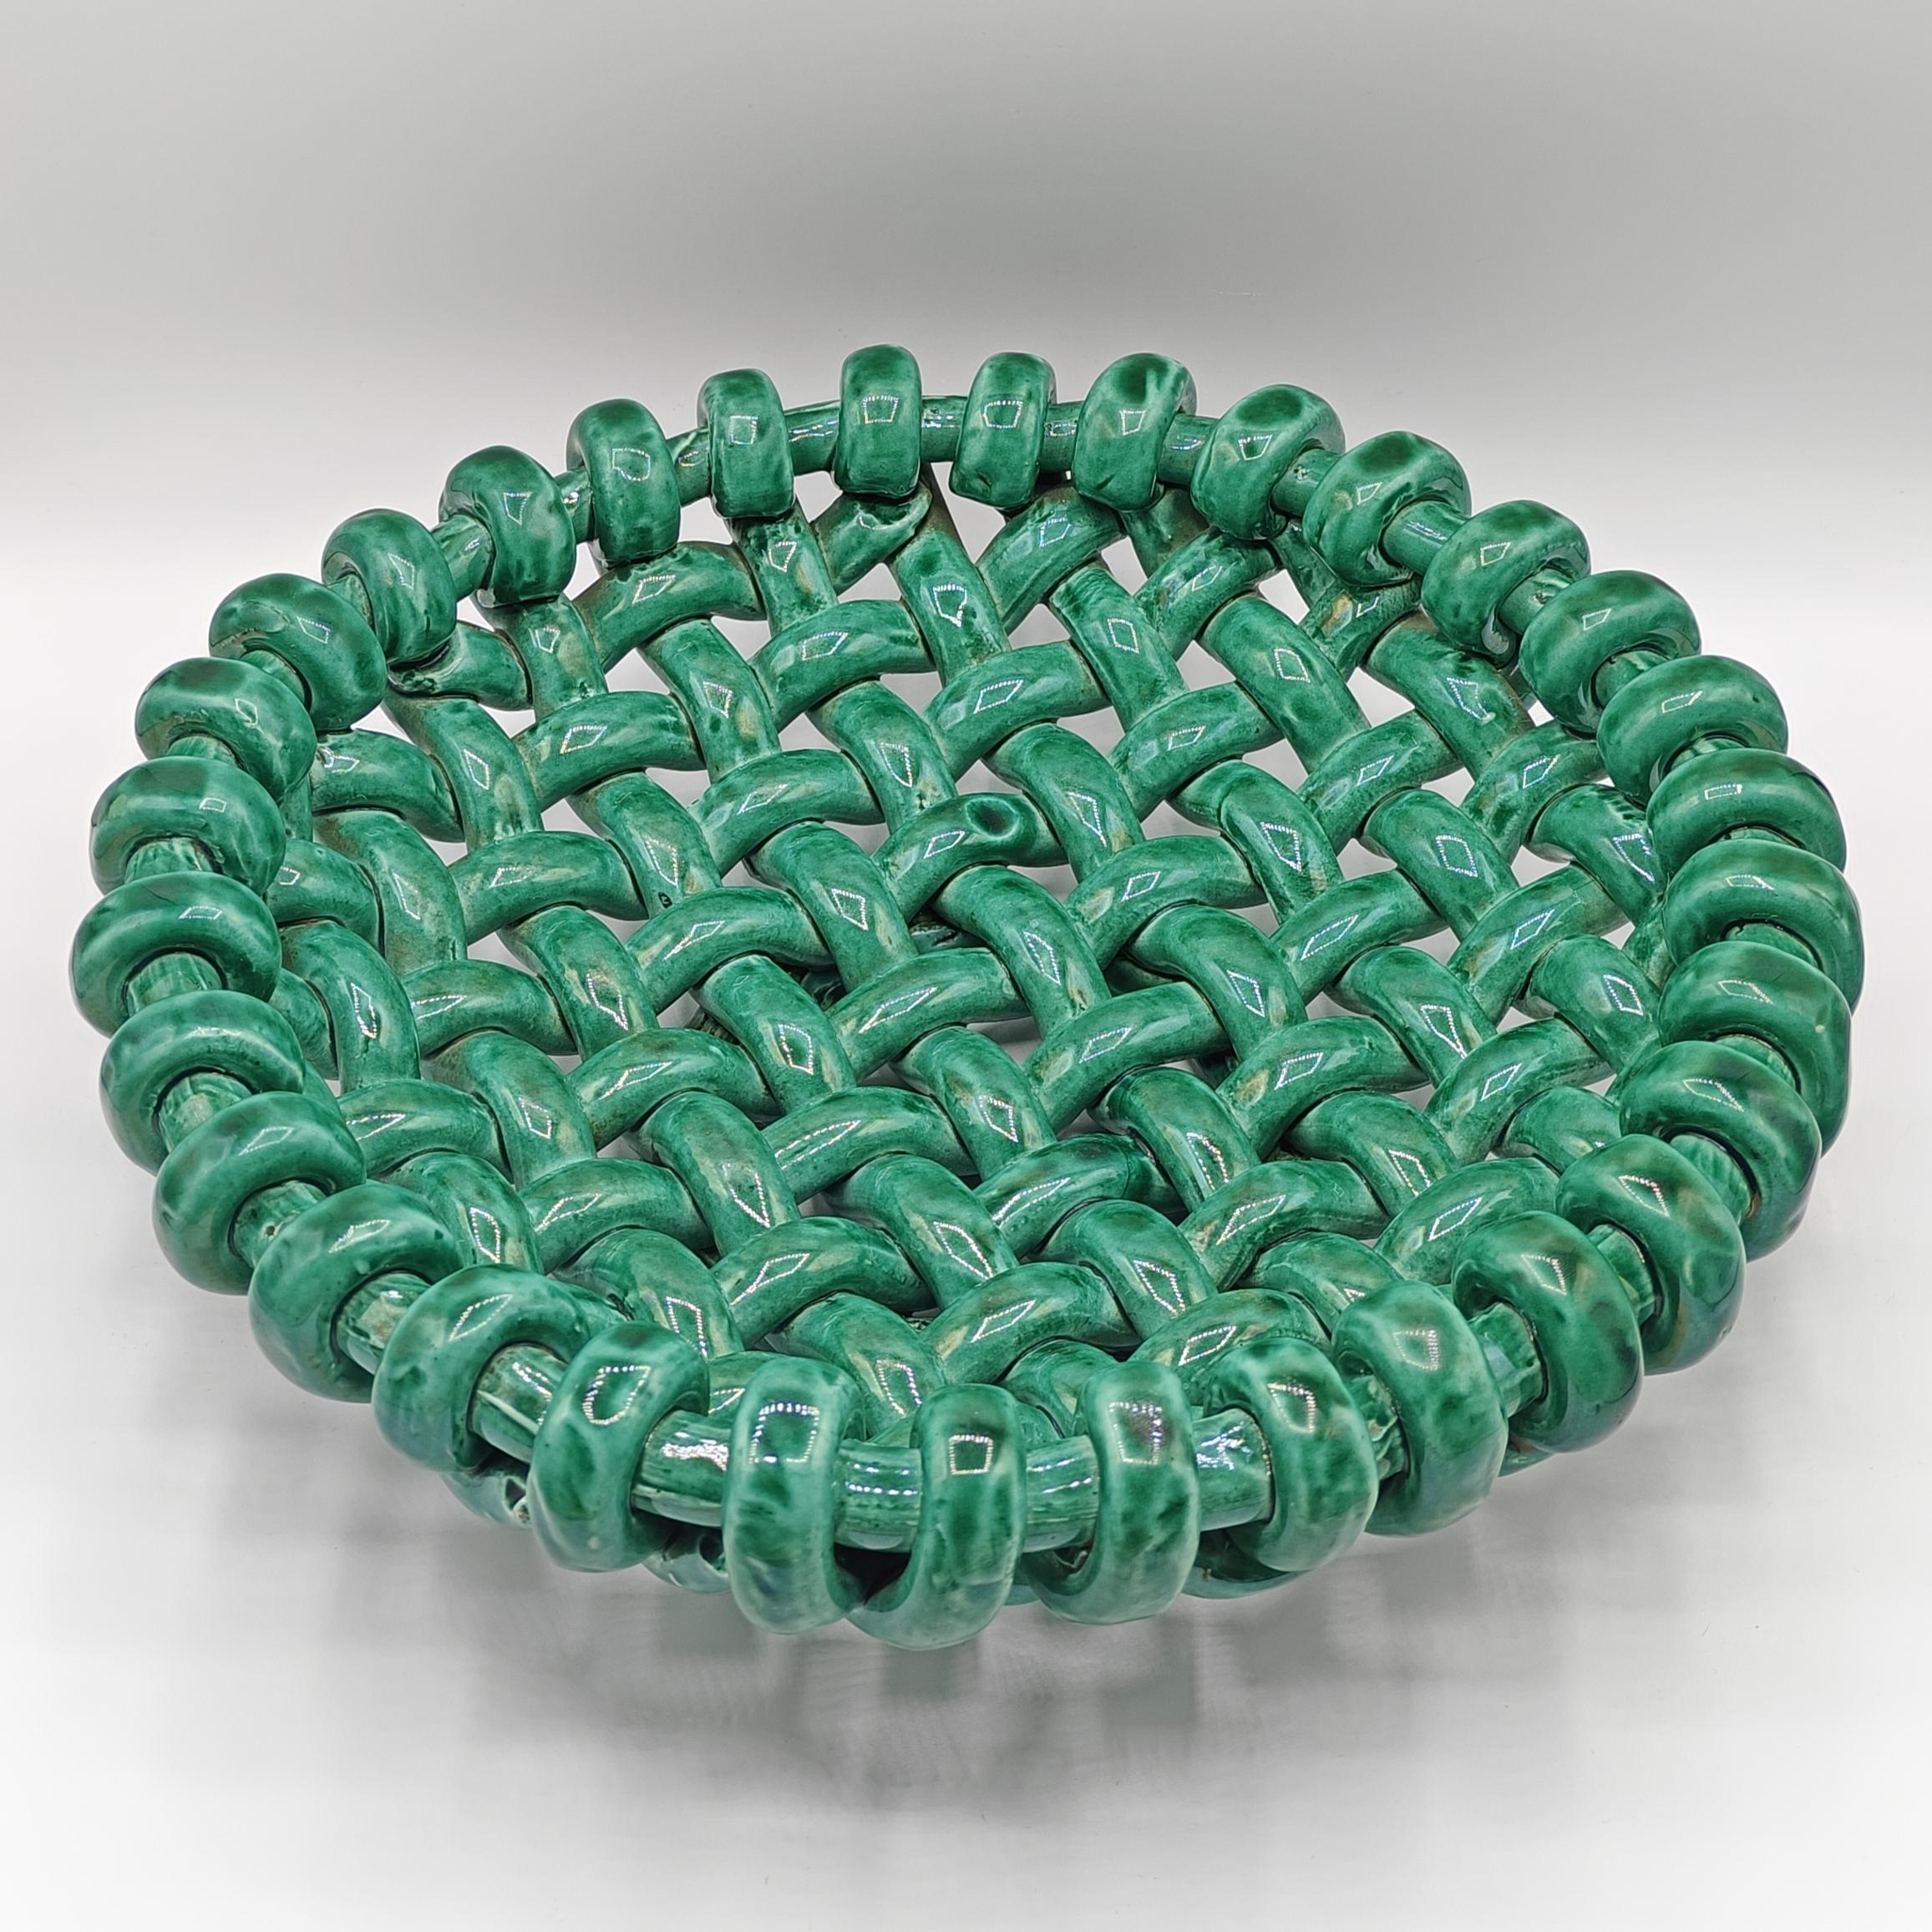 Gorgeous fruit bowl or centerpiece in braided glazed ceramic by Jérôme Massier from the 1950s, produced in his workshops in Vallauris, France. 

This bowl is covered in an absolutely fantastic green glaze, it's marvelous! Its dimensions are ideal